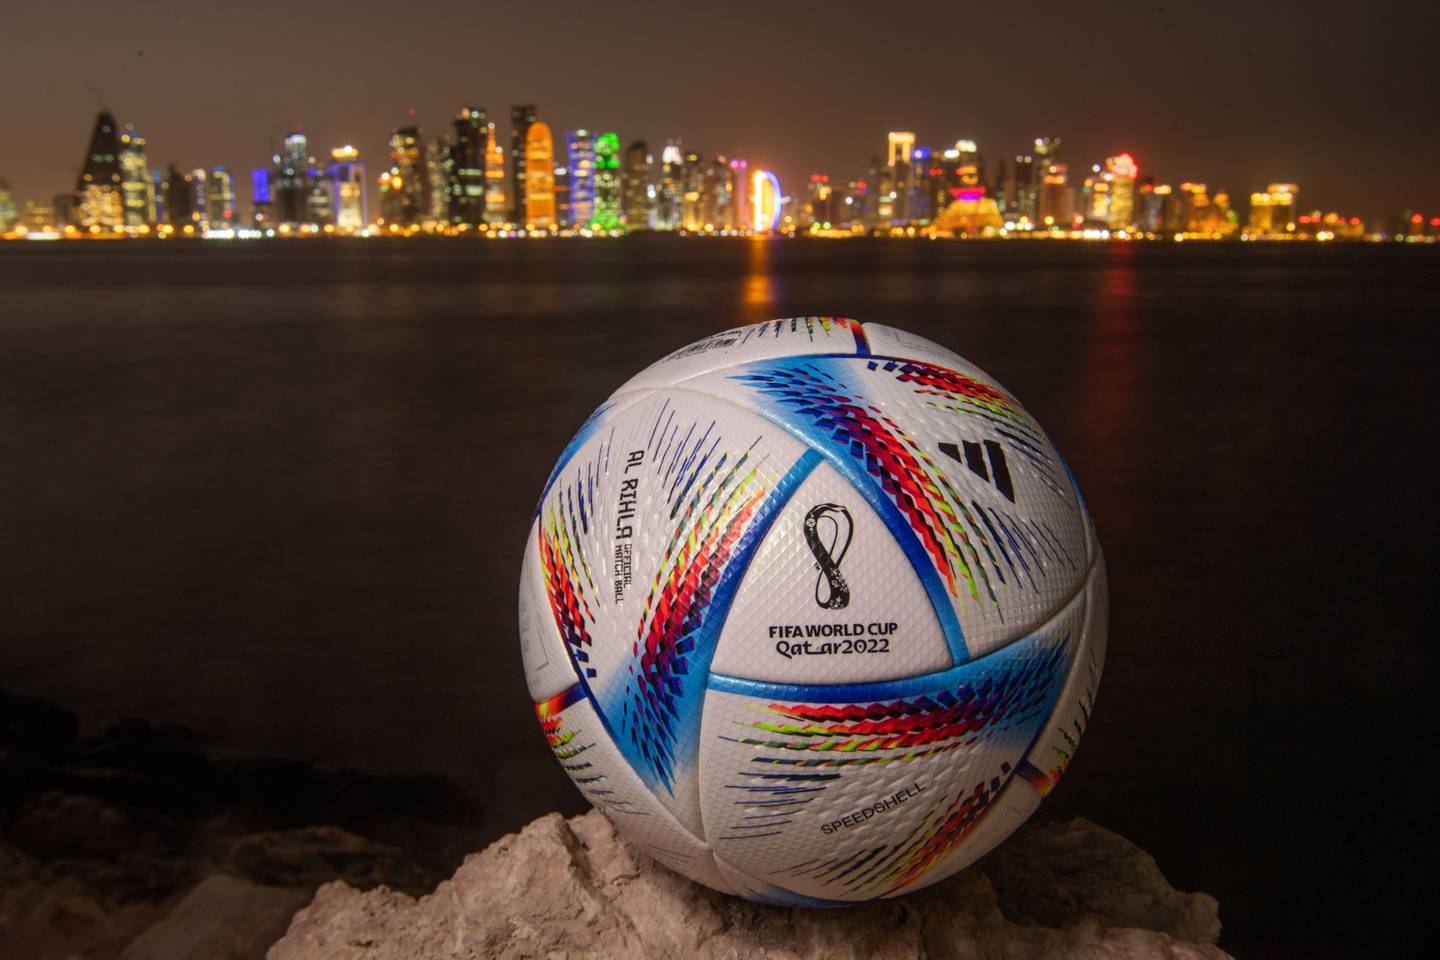 DOHA, QATAR - MARCH 31: In this photo illustration an official FIFA World Cup Qatar 2022 ball sits on display in front of the skyline of Doha ahead of the FIFA World Cup Qatar 2022 draw on March 31, 2022 in Doha, Qatar. (Photo by David Ramos/Getty Images)dfd